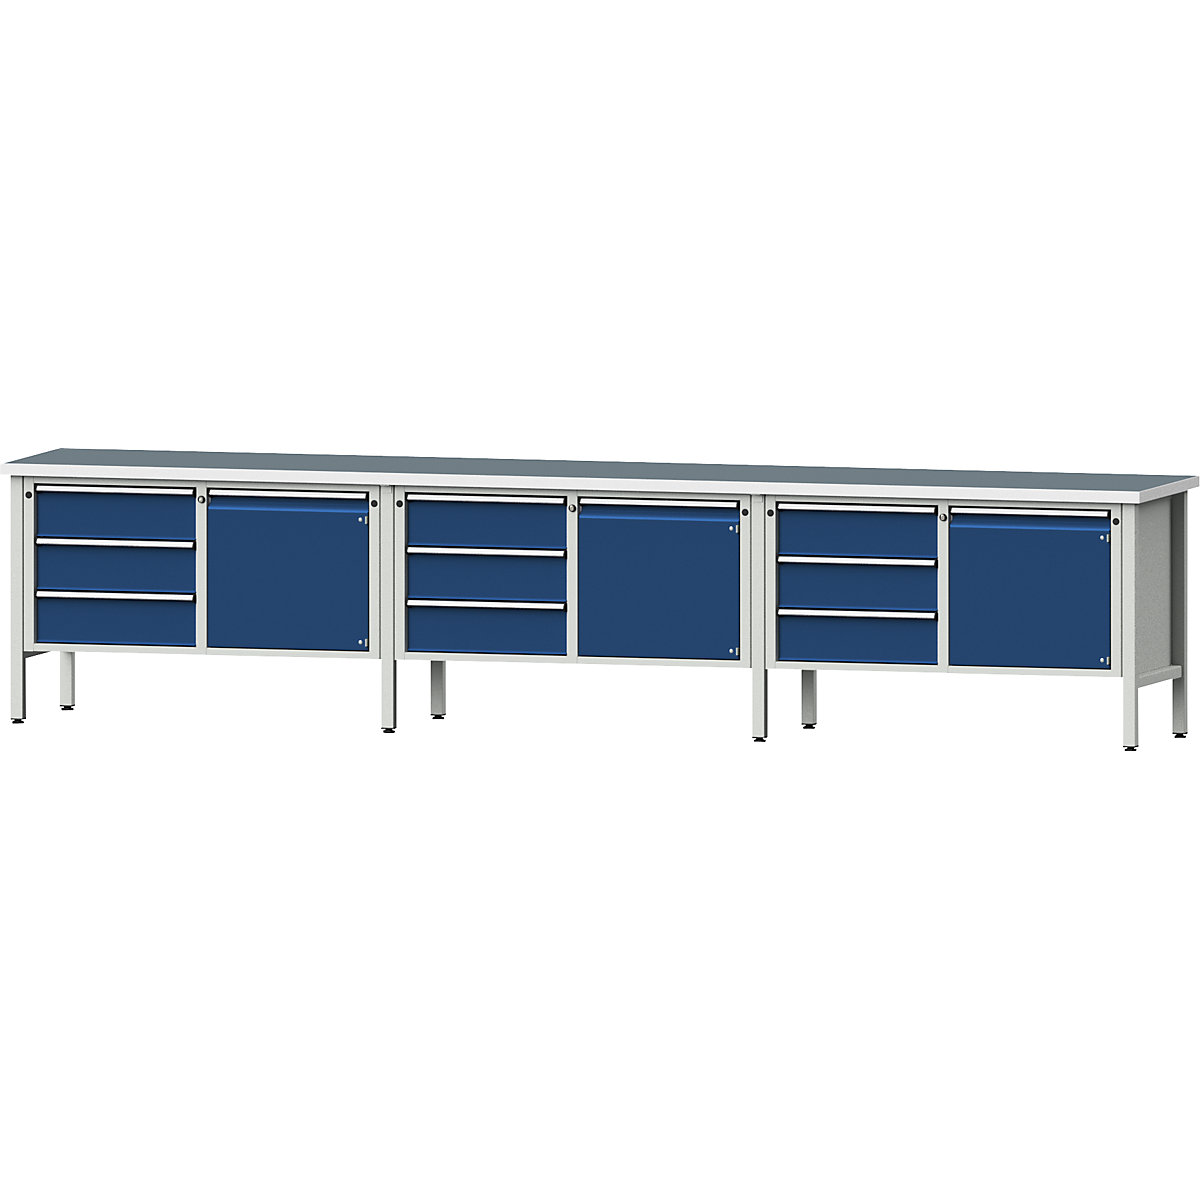 Workbench extra wide, frame construction – ANKE, 3 doors, 9 drawers are fully extendable, working height 890 mm, universal worktop-9